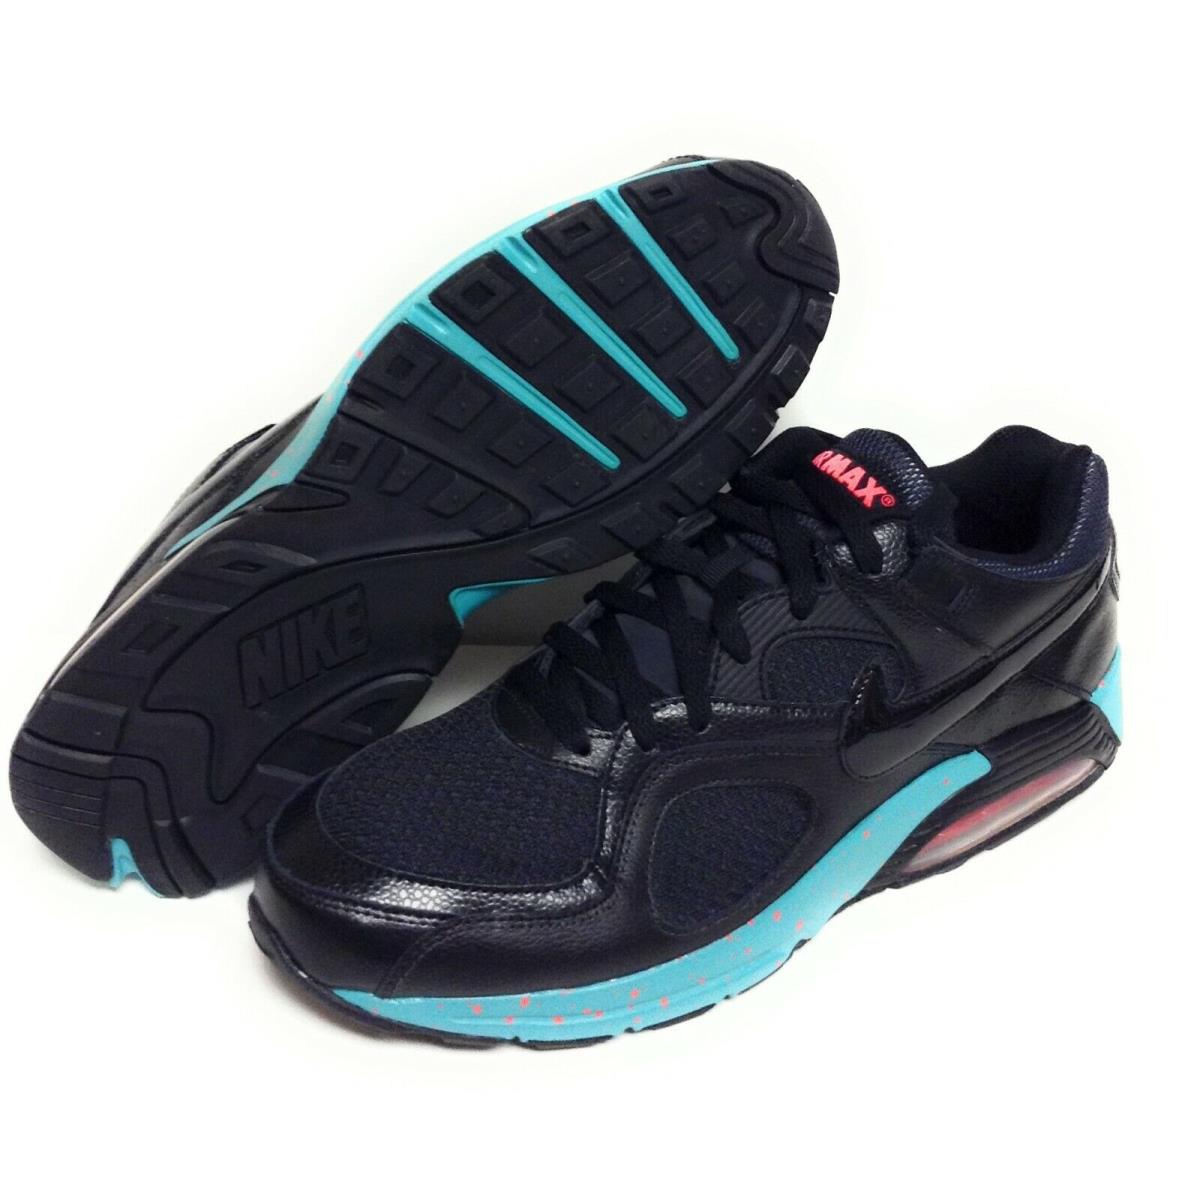 Mens Nike Air Max Go Strong 418115 017 Black Turquoise Pink 2013 Sneakers Shoes - Black , Black Manufacturer